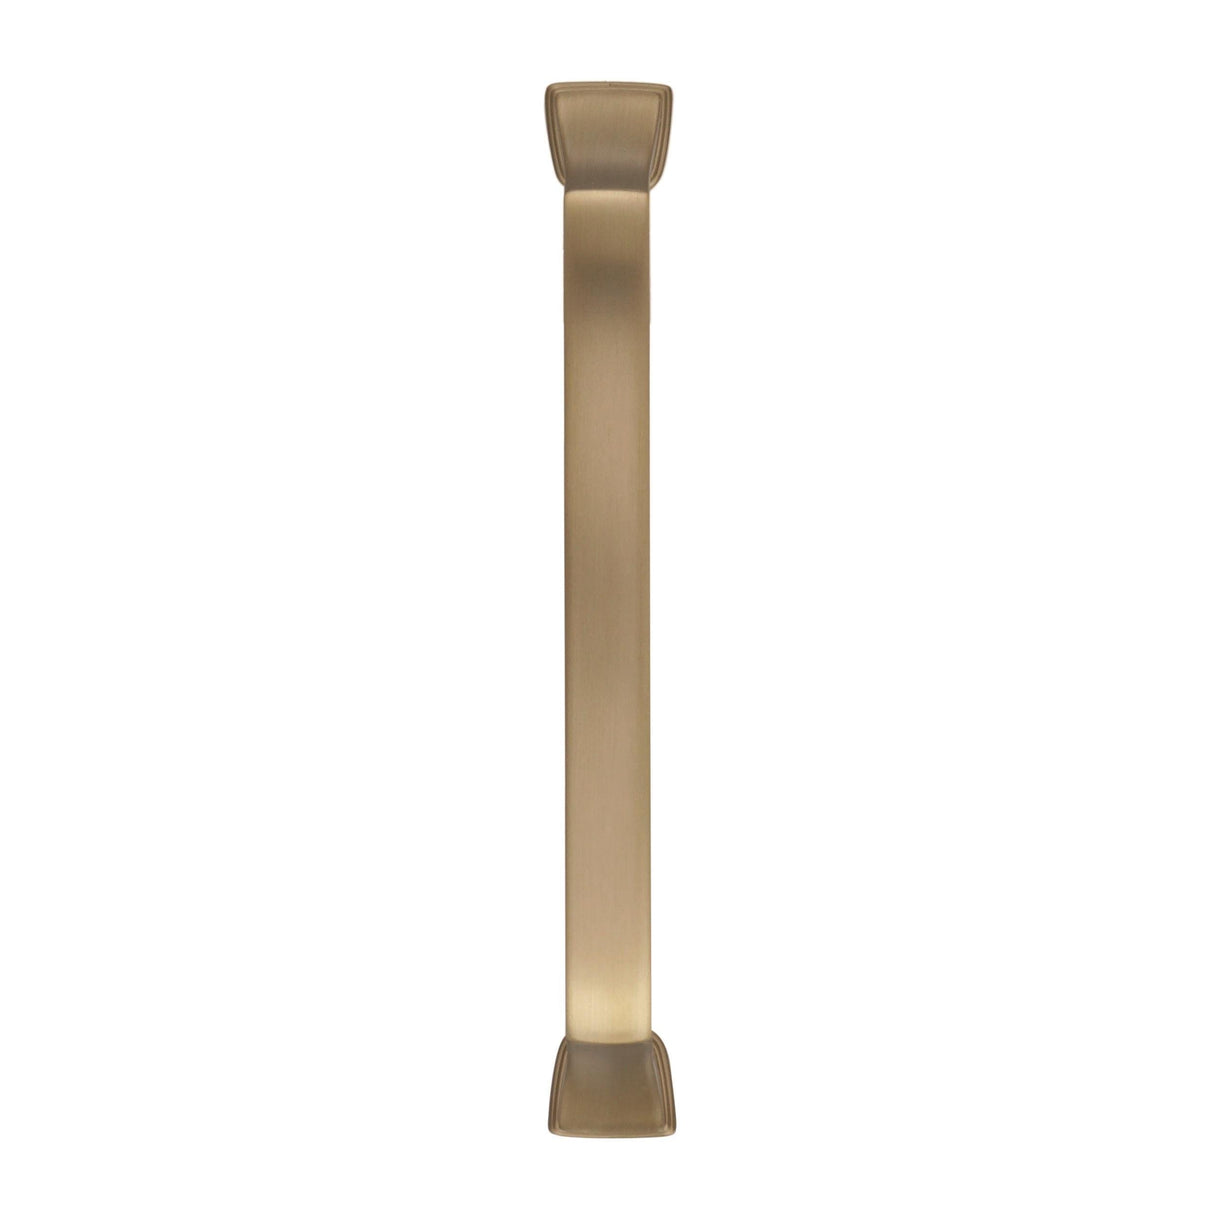 Amerock Cabinet Pull Golden Champagne 5-1/16 inch (128 mm) Center to Center Revitalize 1 Pack Drawer Pull Drawer Handle Cabinet Hardware